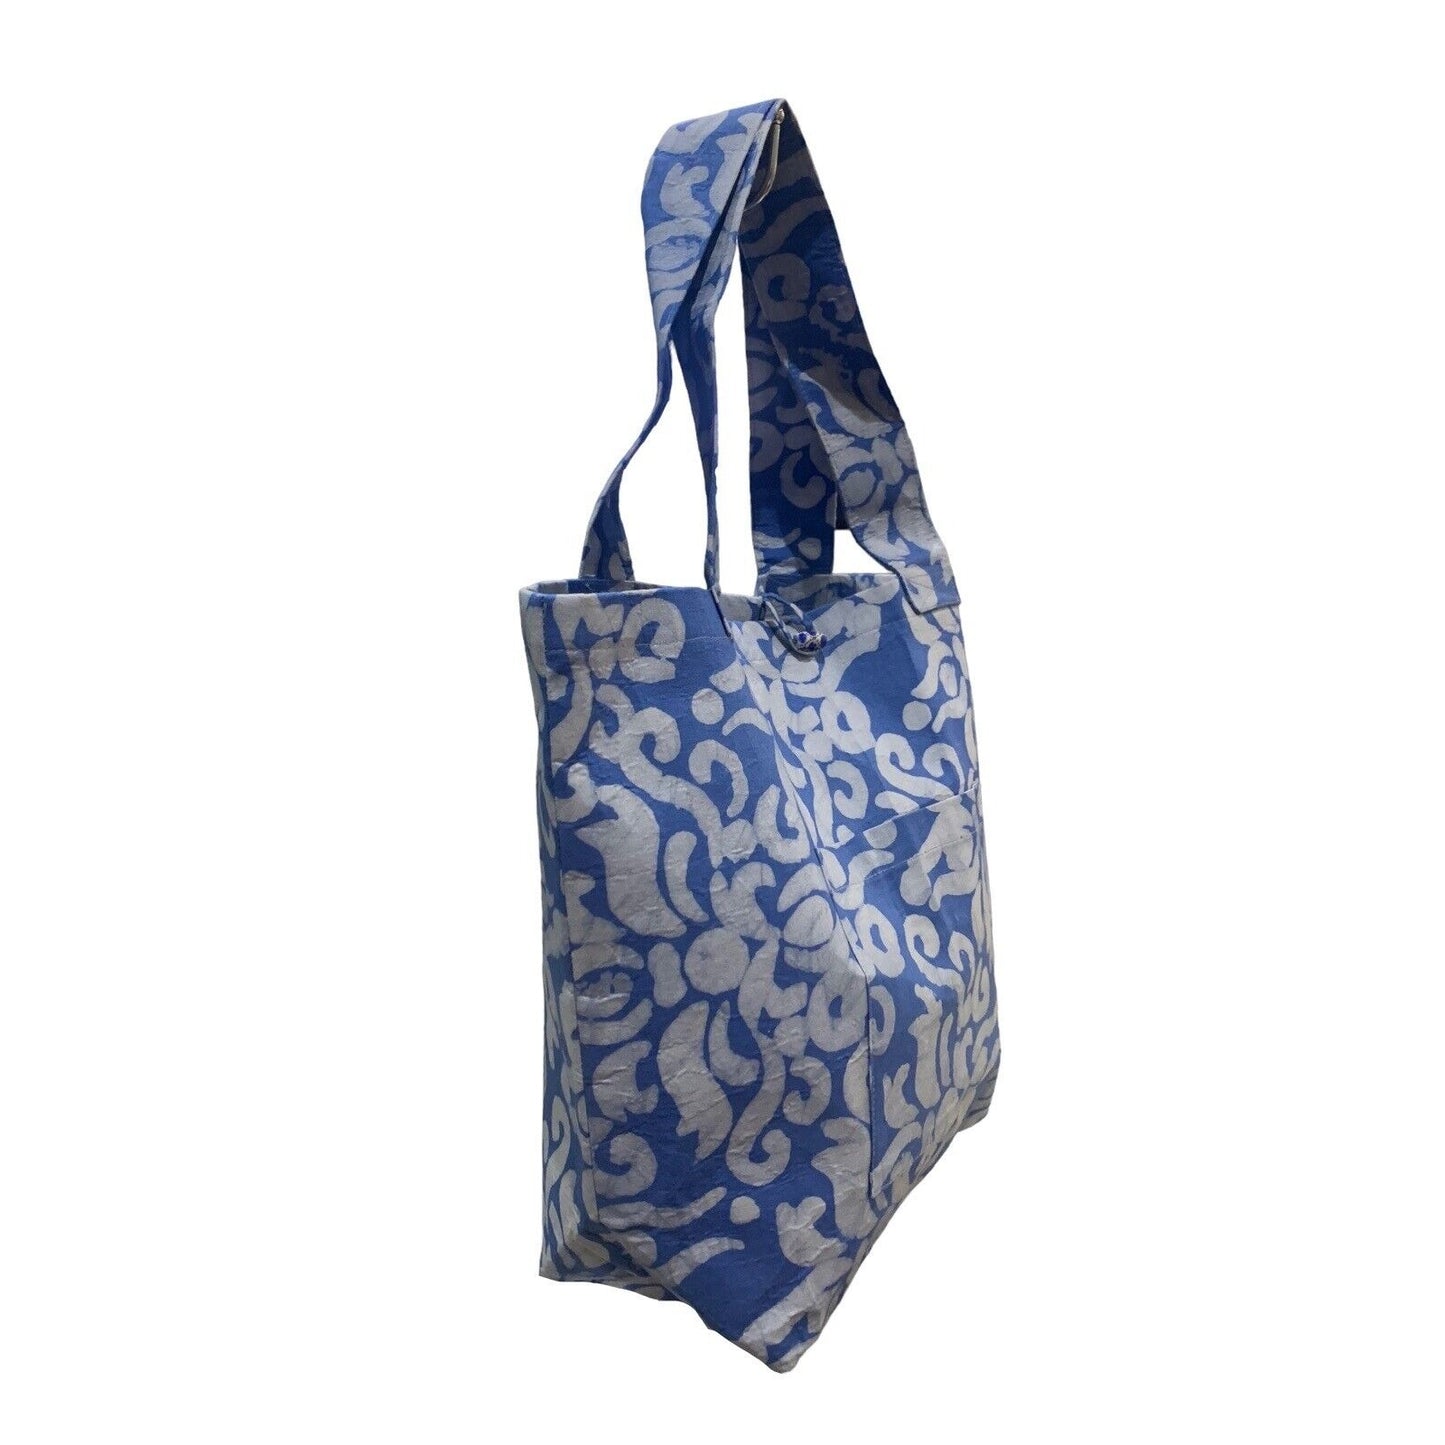 Fabric-Bound Shopper Tote By Global Mamas